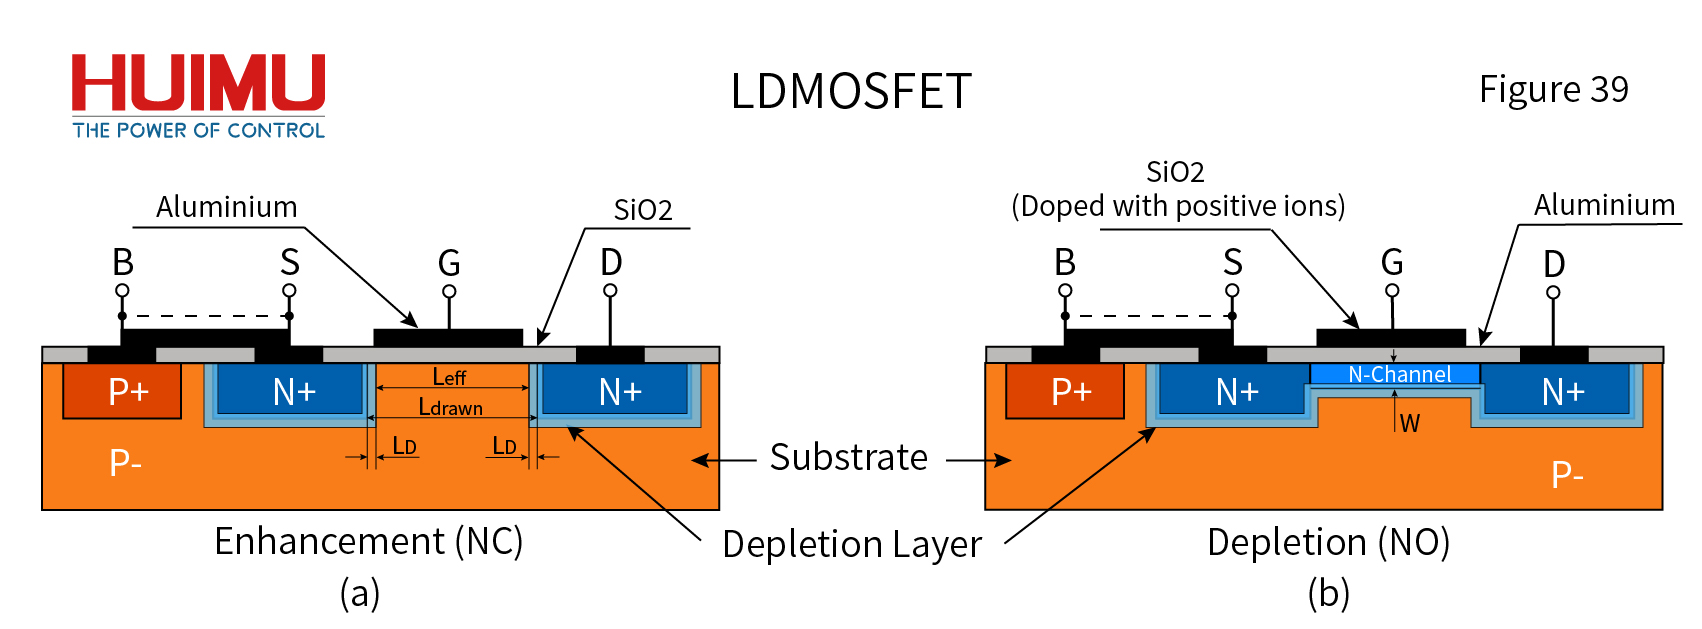 The Structure and Symbol of LDMOSFET